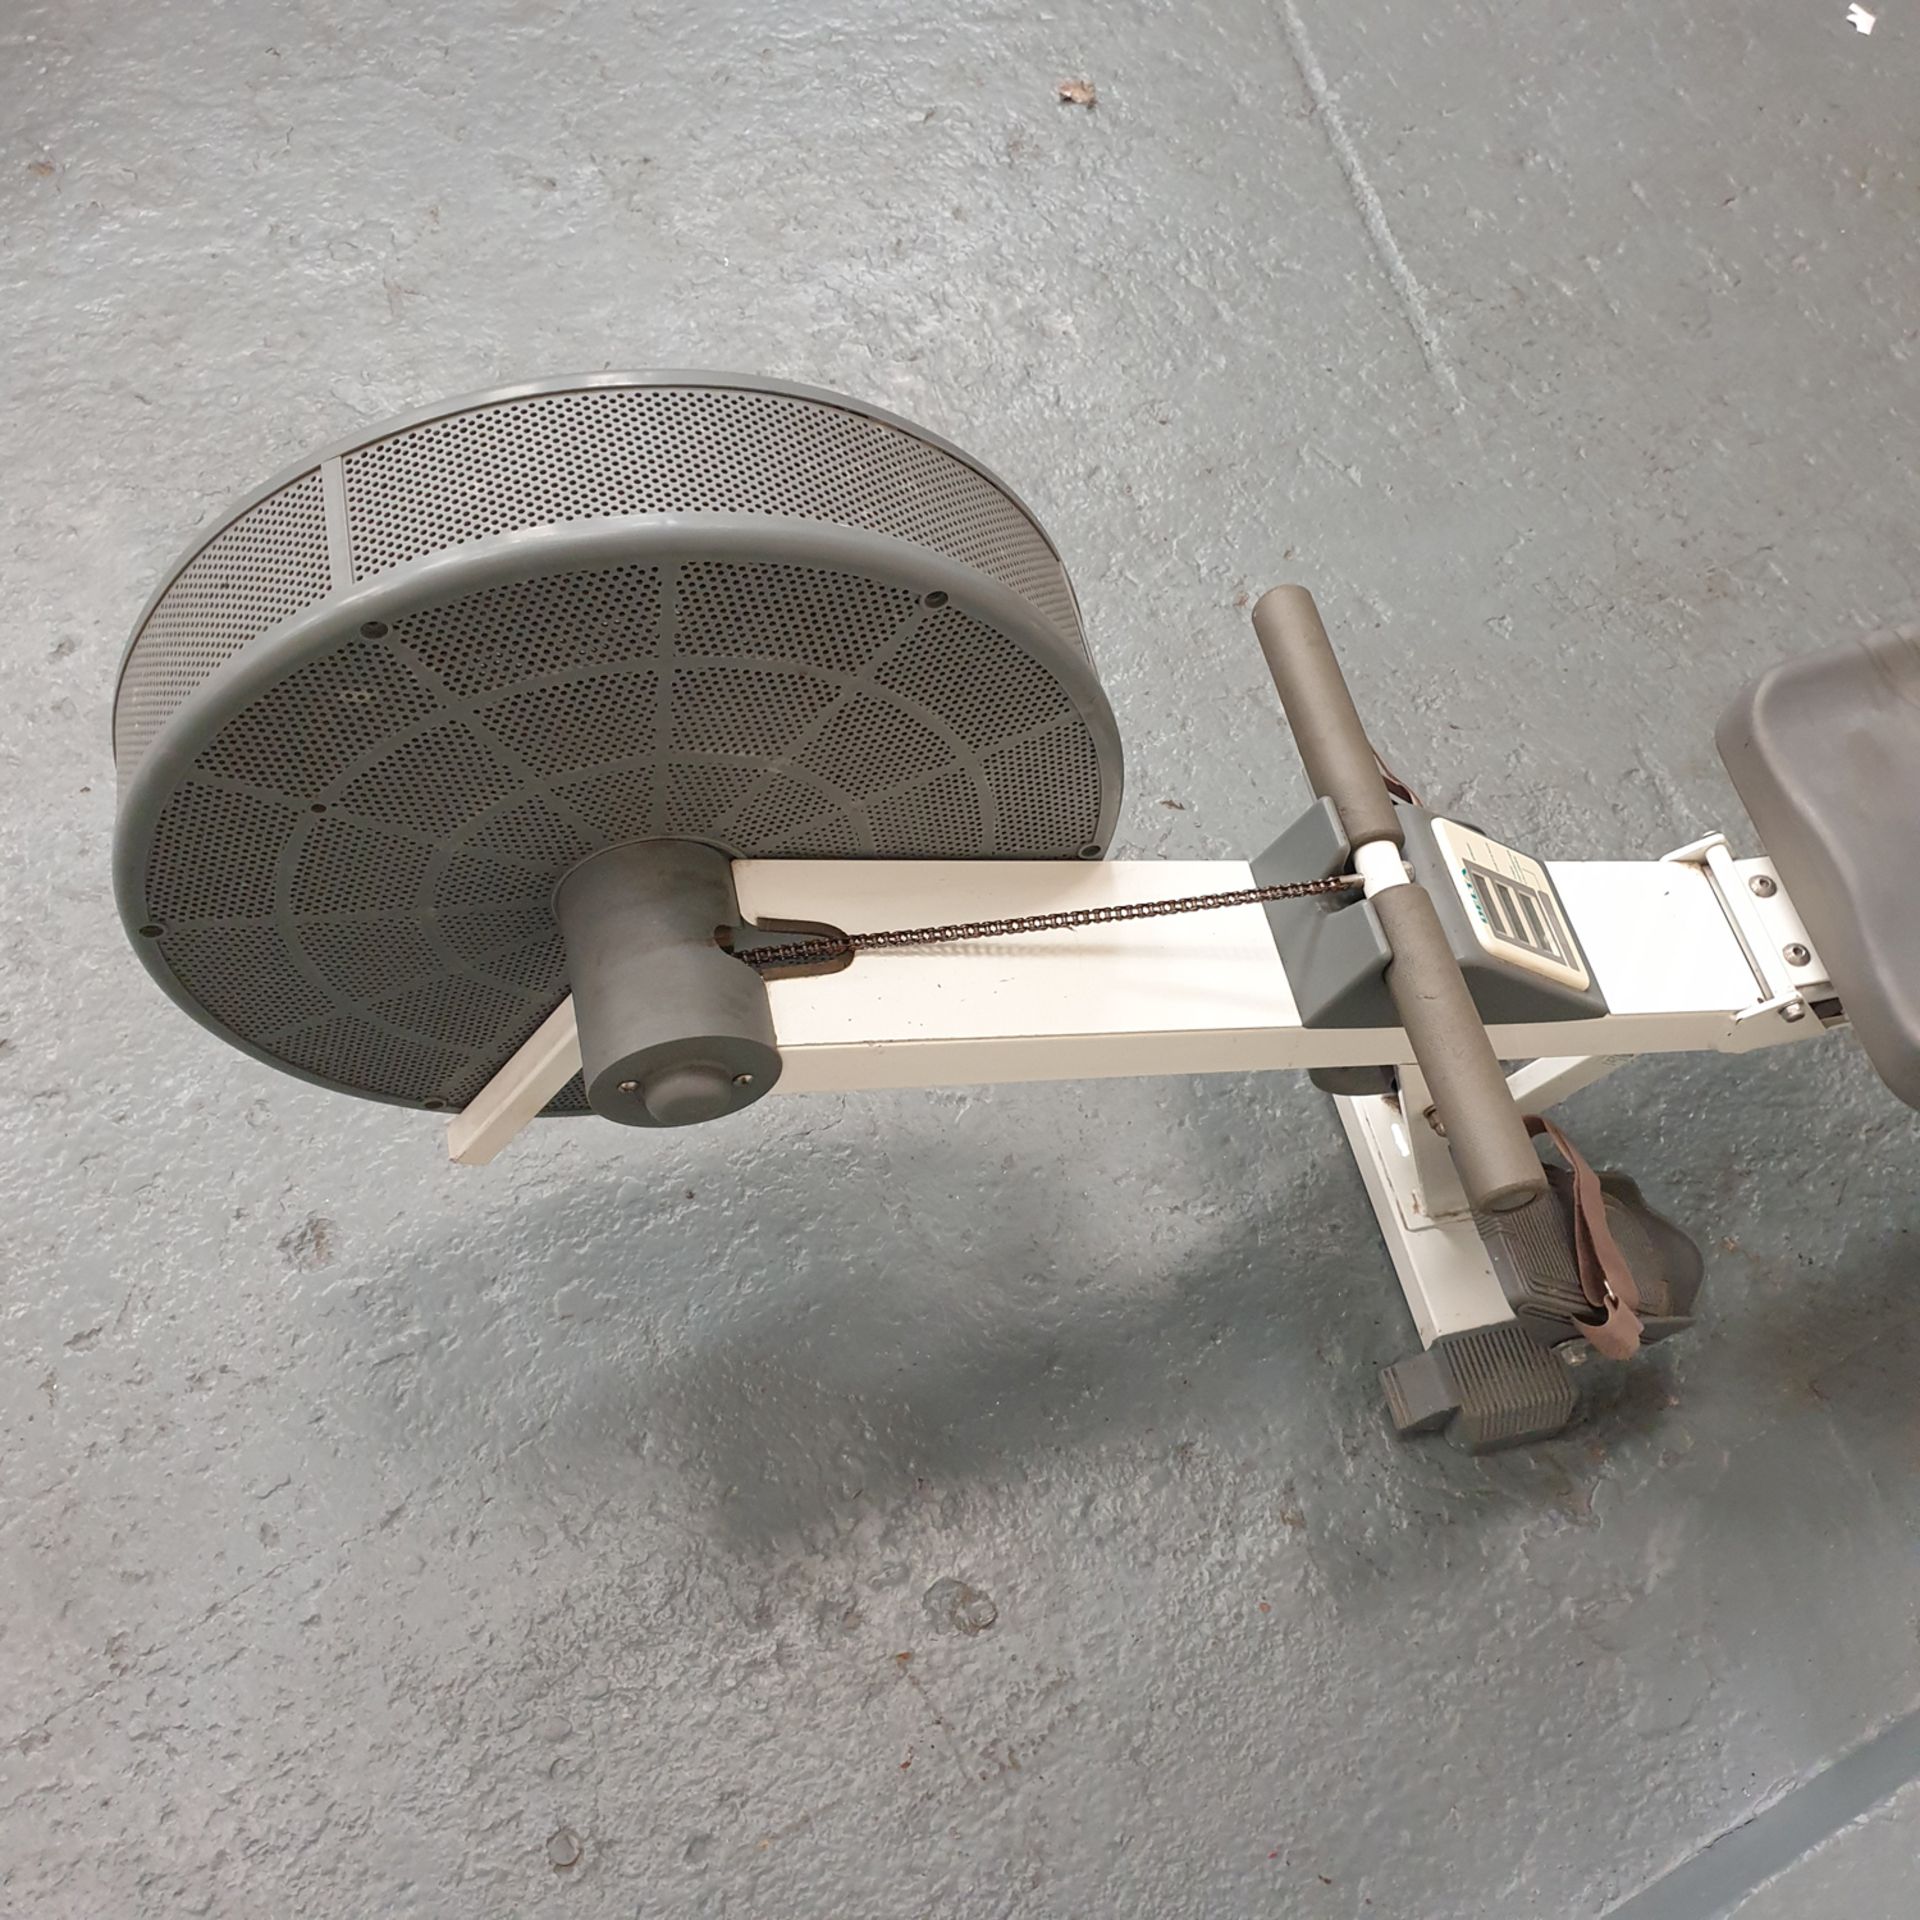 DELTA Air Rower Rowing Machine. Please Note This Item is for Spares and Repairs. - Image 4 of 5